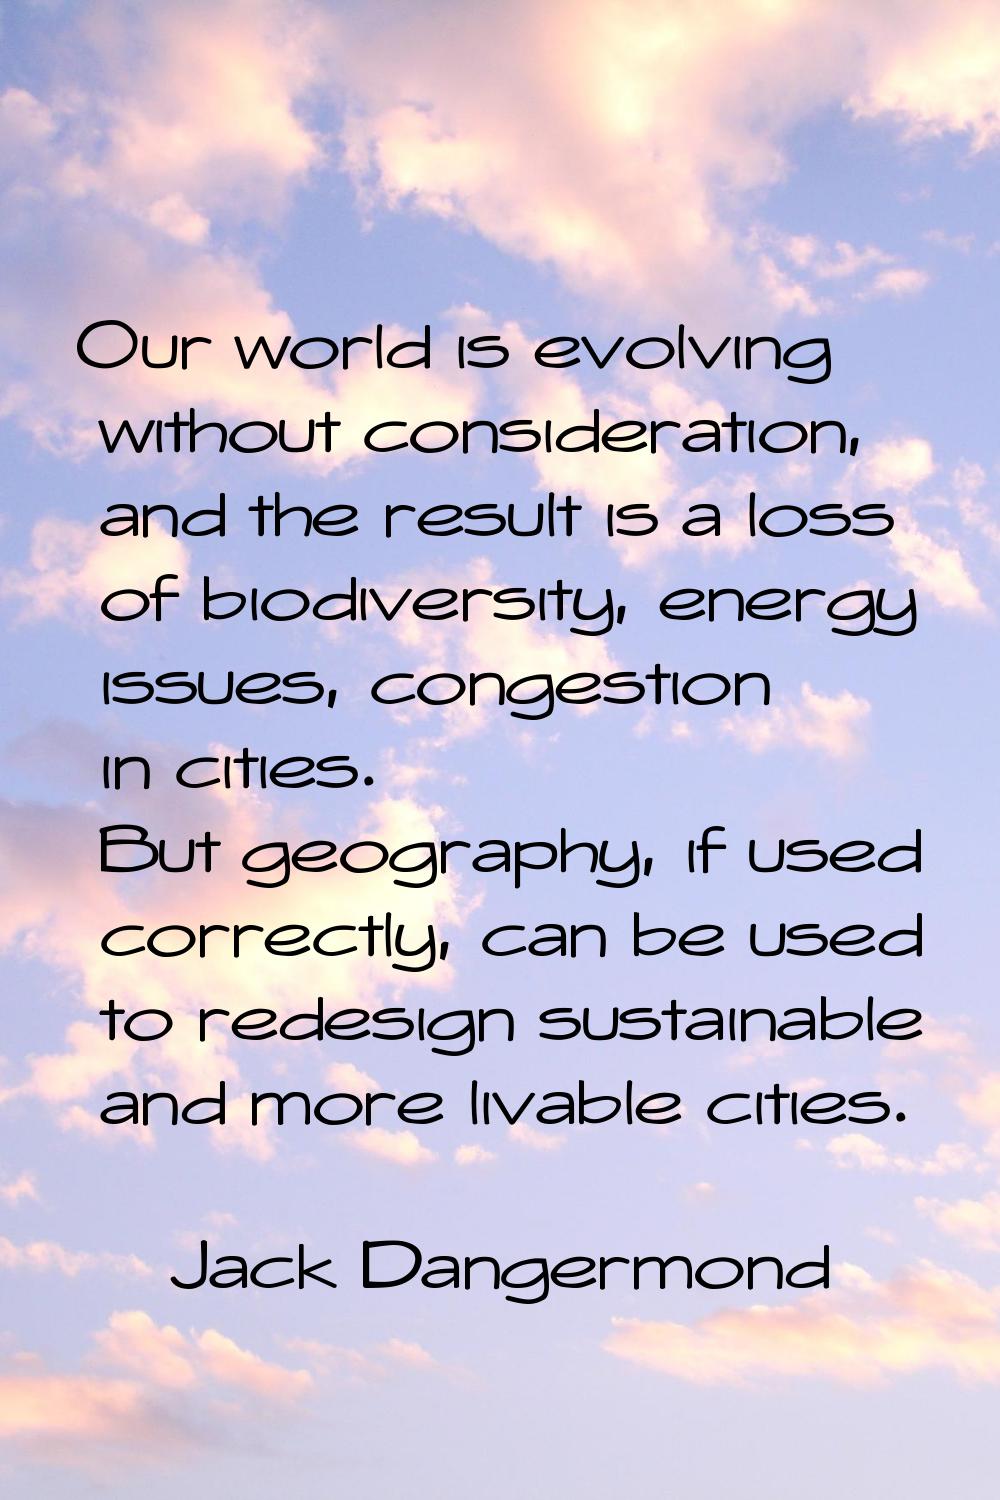 Our world is evolving without consideration, and the result is a loss of biodiversity, energy issue